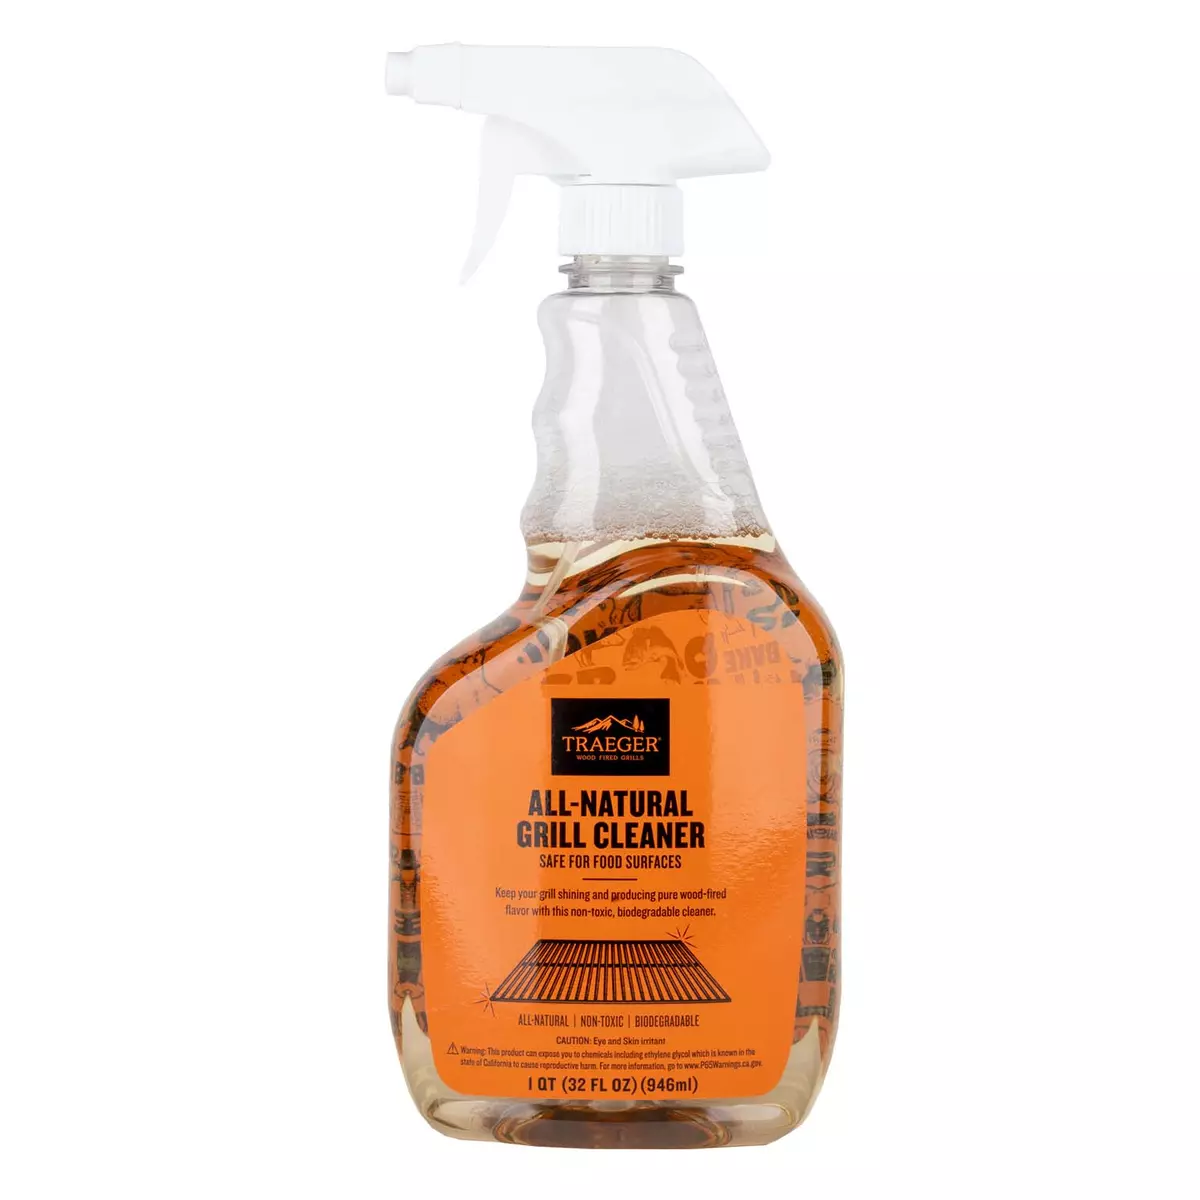 Traeger All-Natural Grill Cleaner - image 1